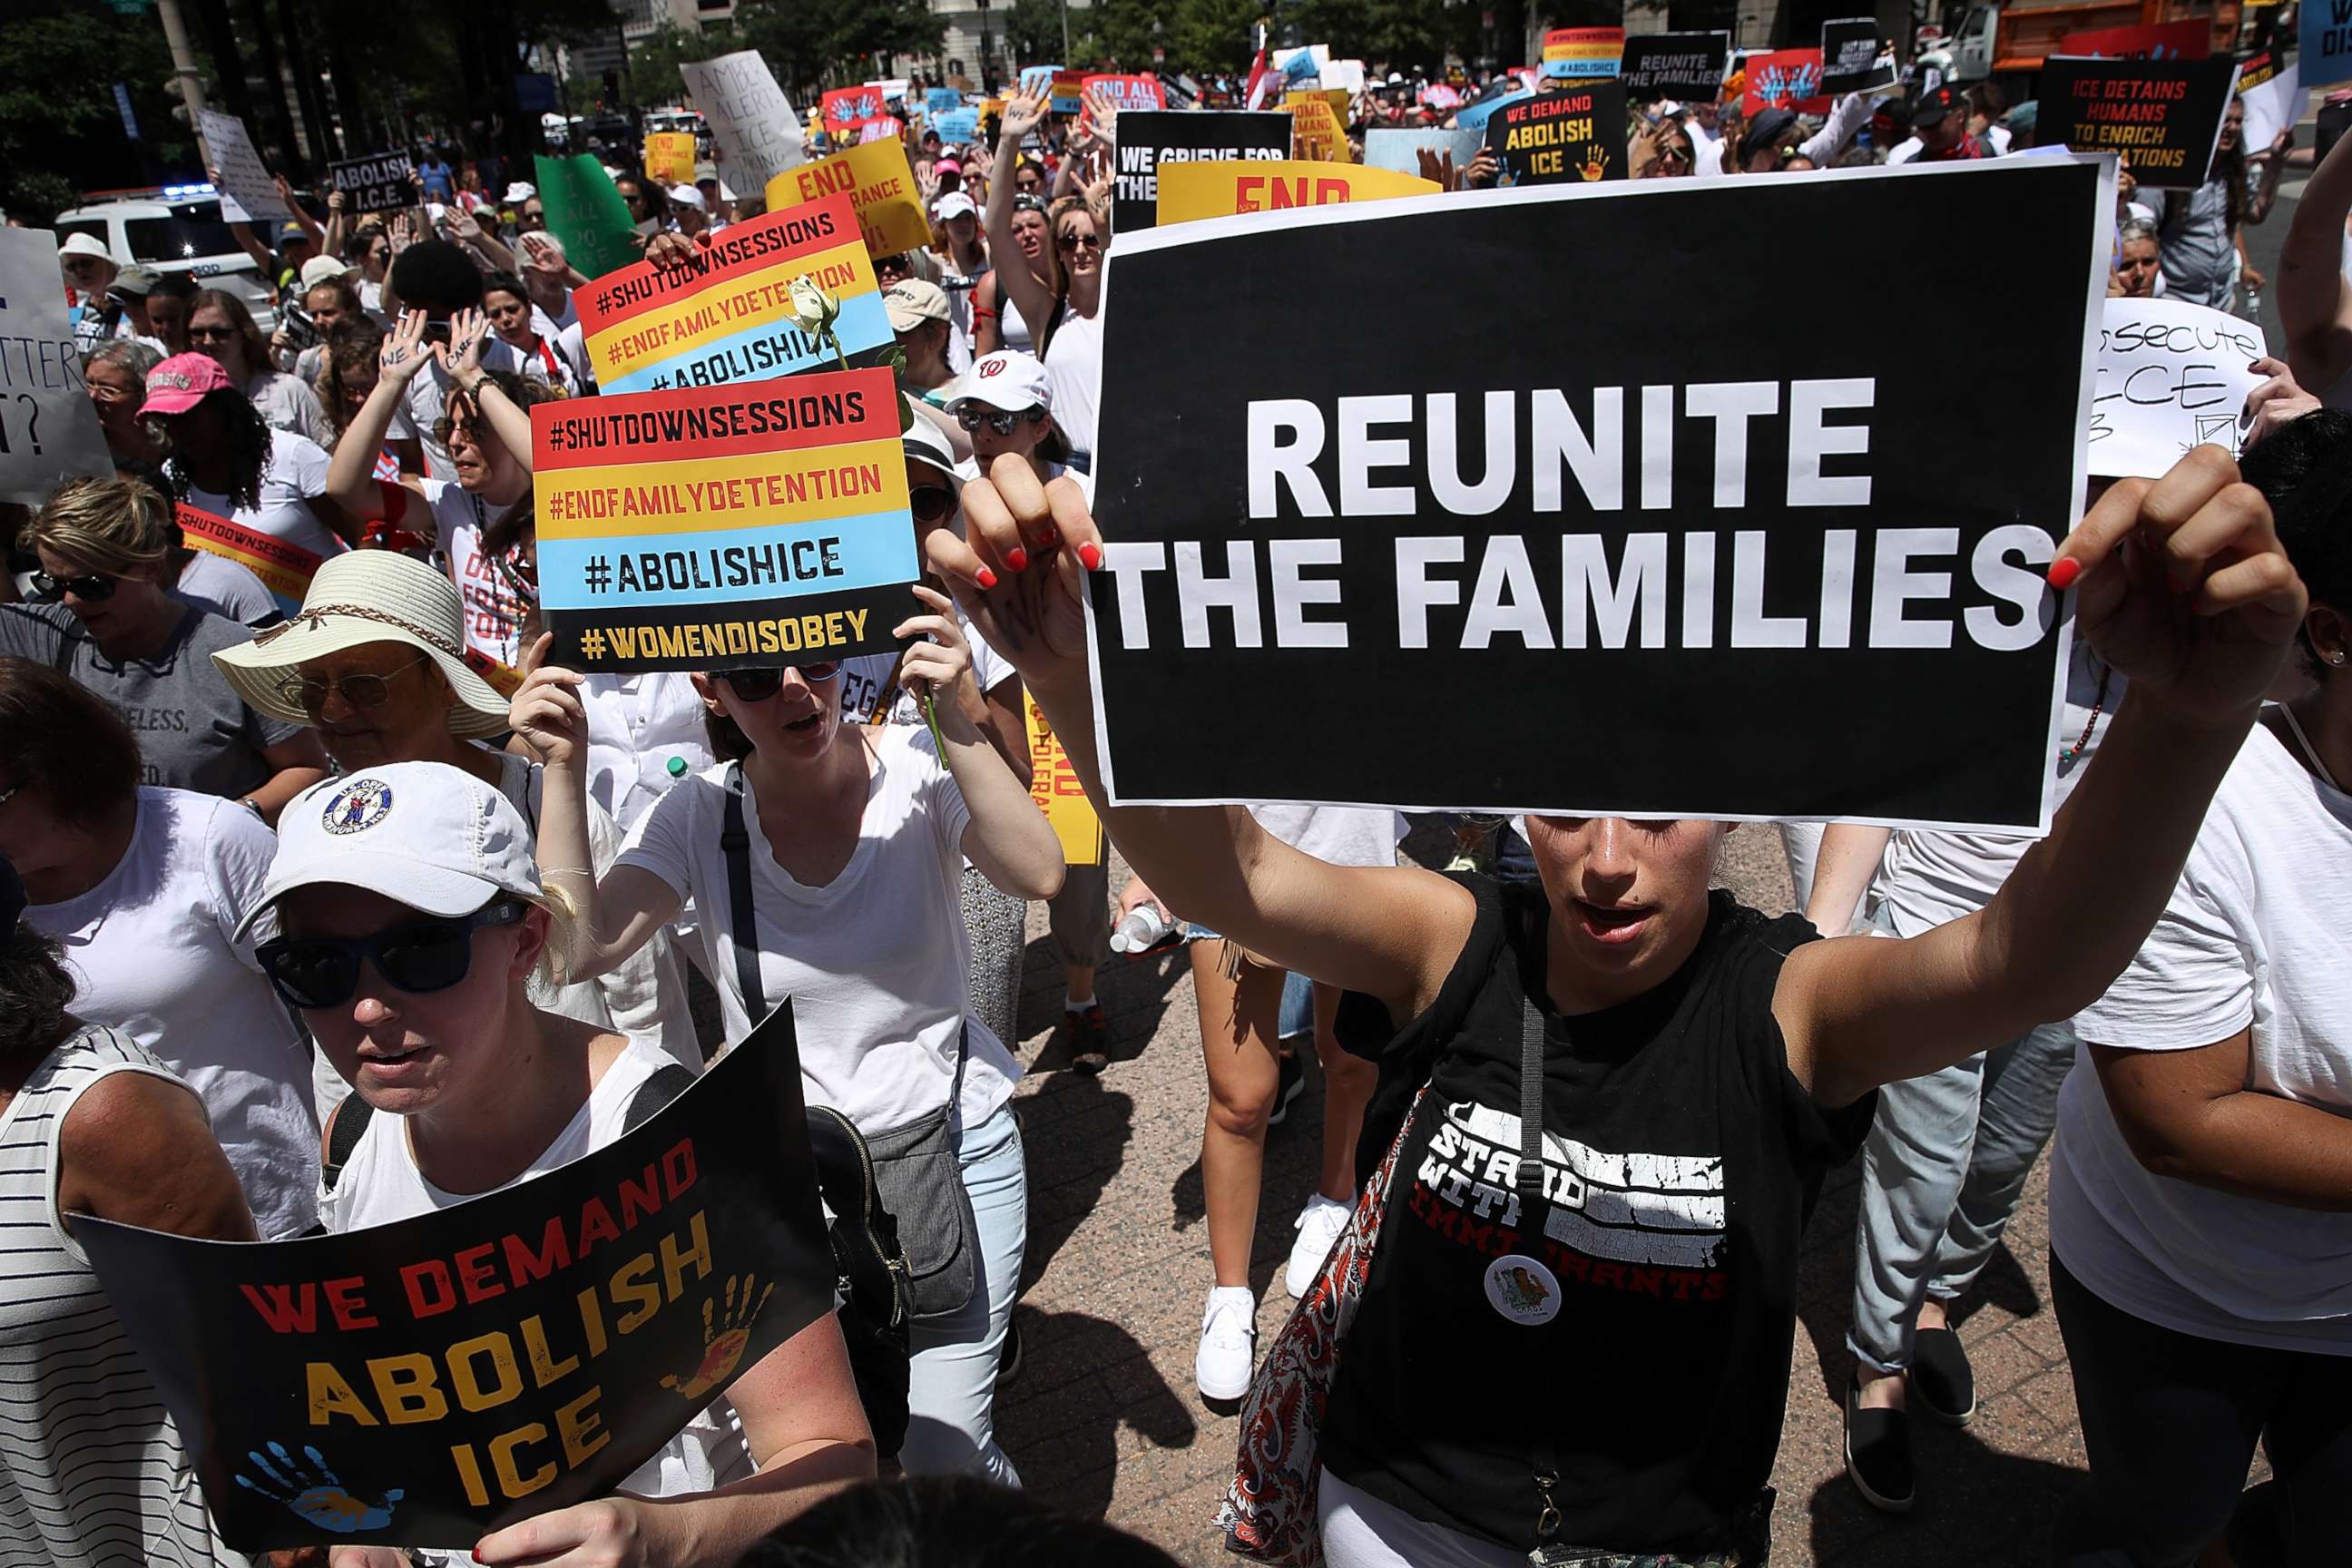 PHOTO: Protesters march from Freedom Plaza to demonstrate against family detentions and to demand the end of criminalizing efforts of asylum seekers and immigrants June 28, 2018 in Washington, D.C.